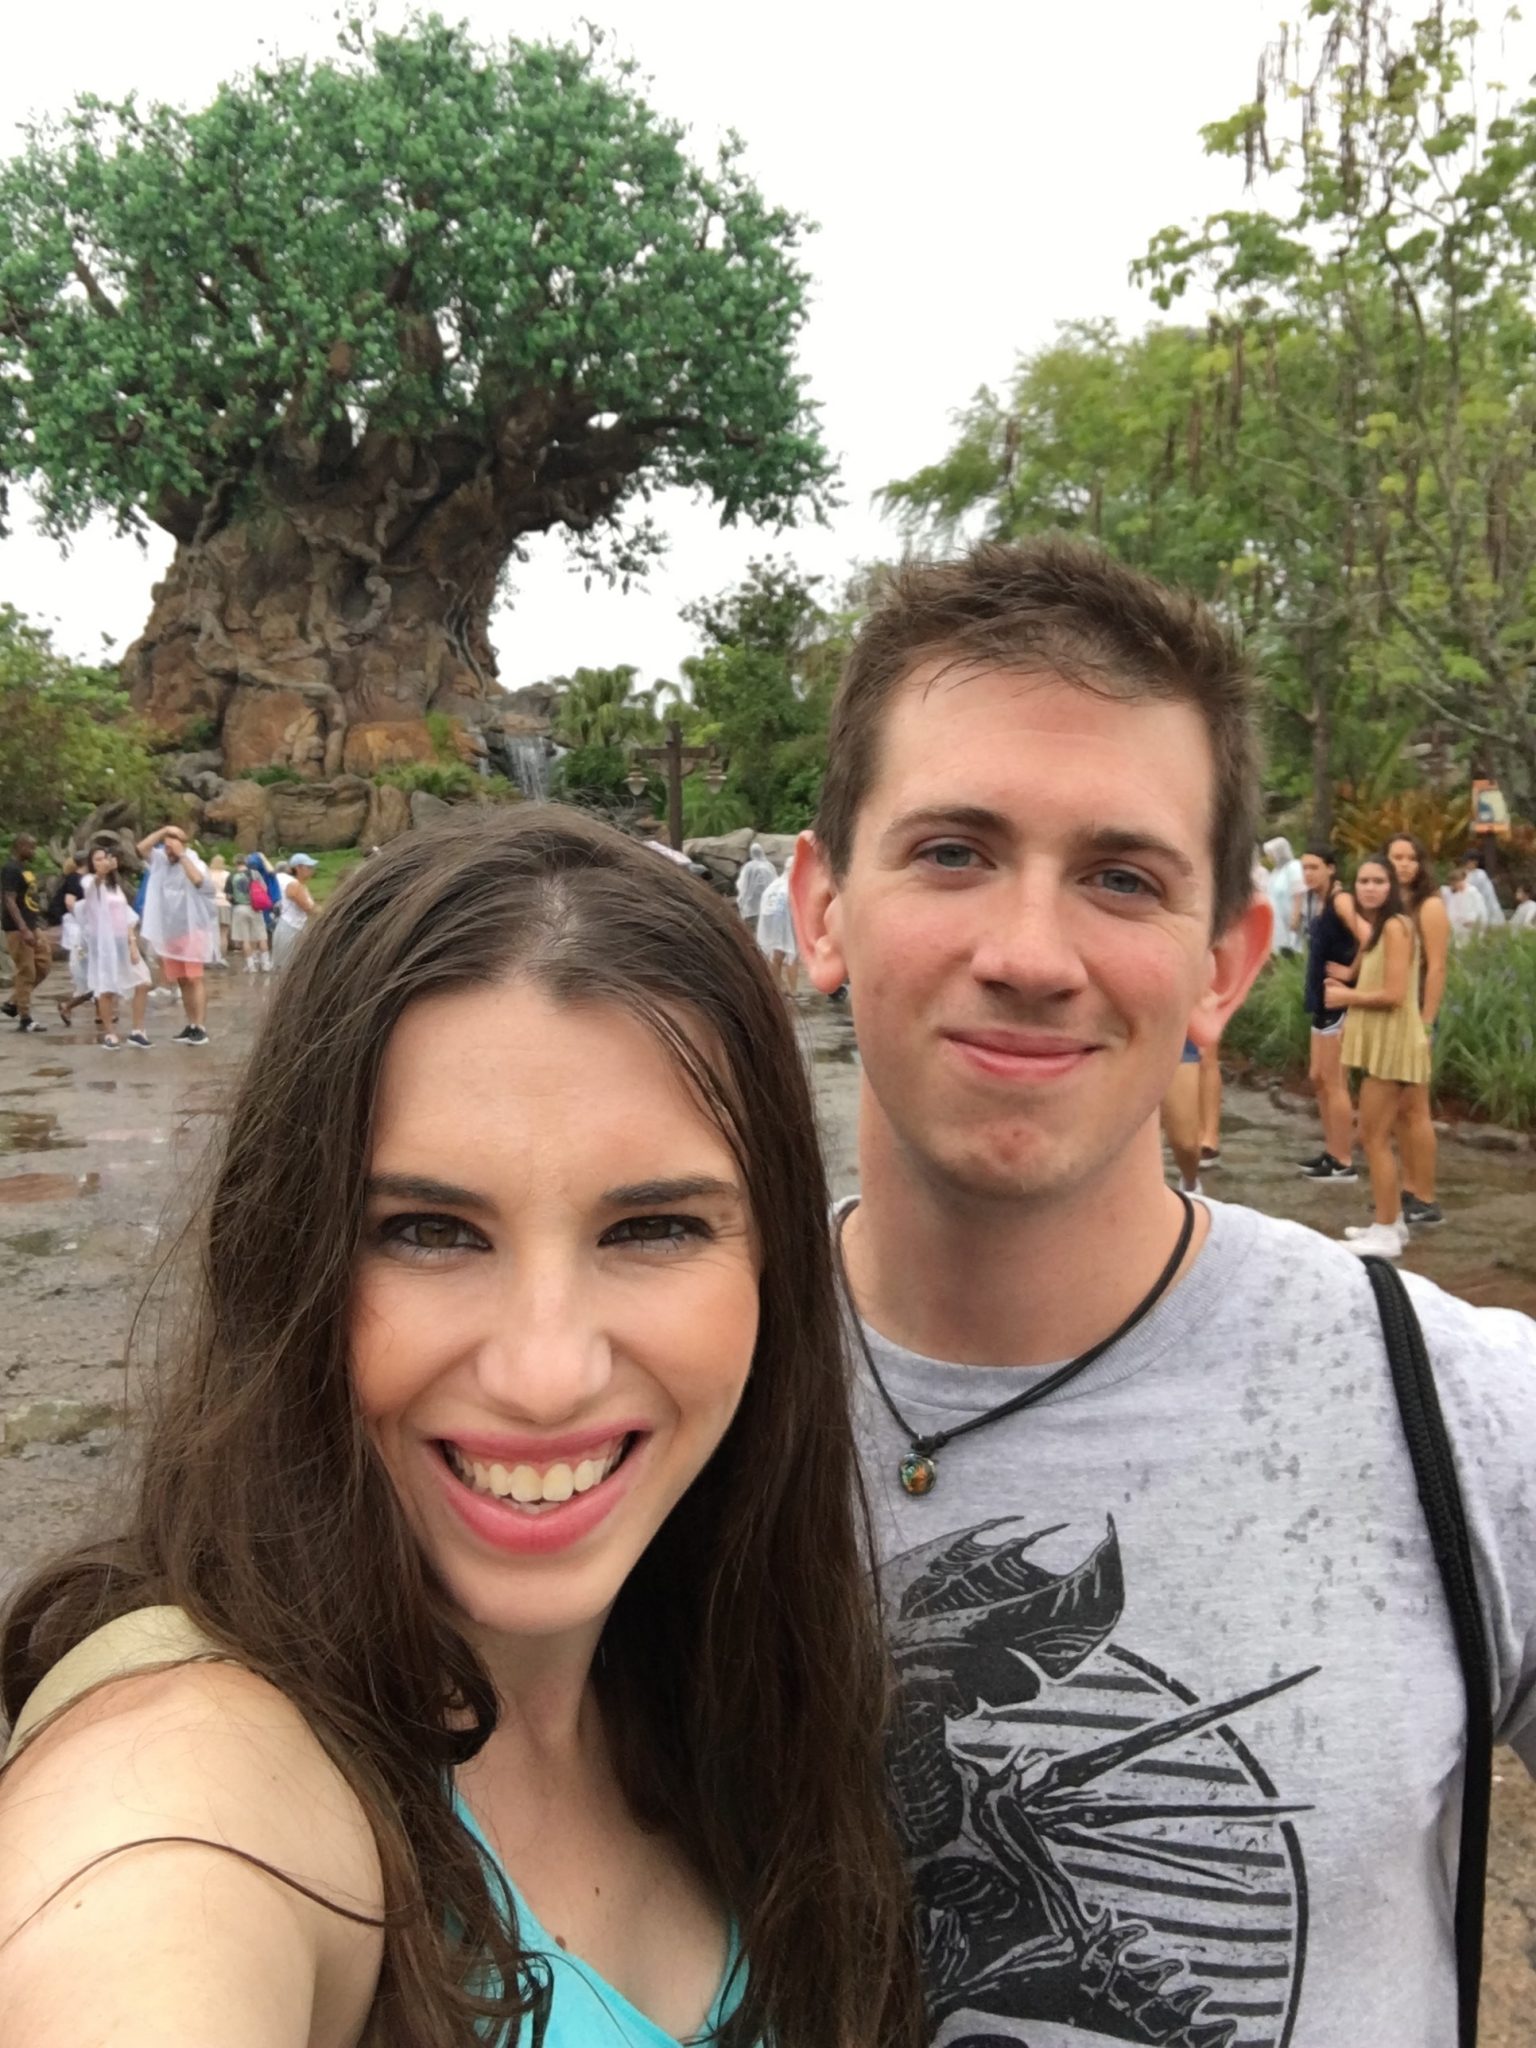 Chelsea and Robby in front of the Tree of Life in the rain.